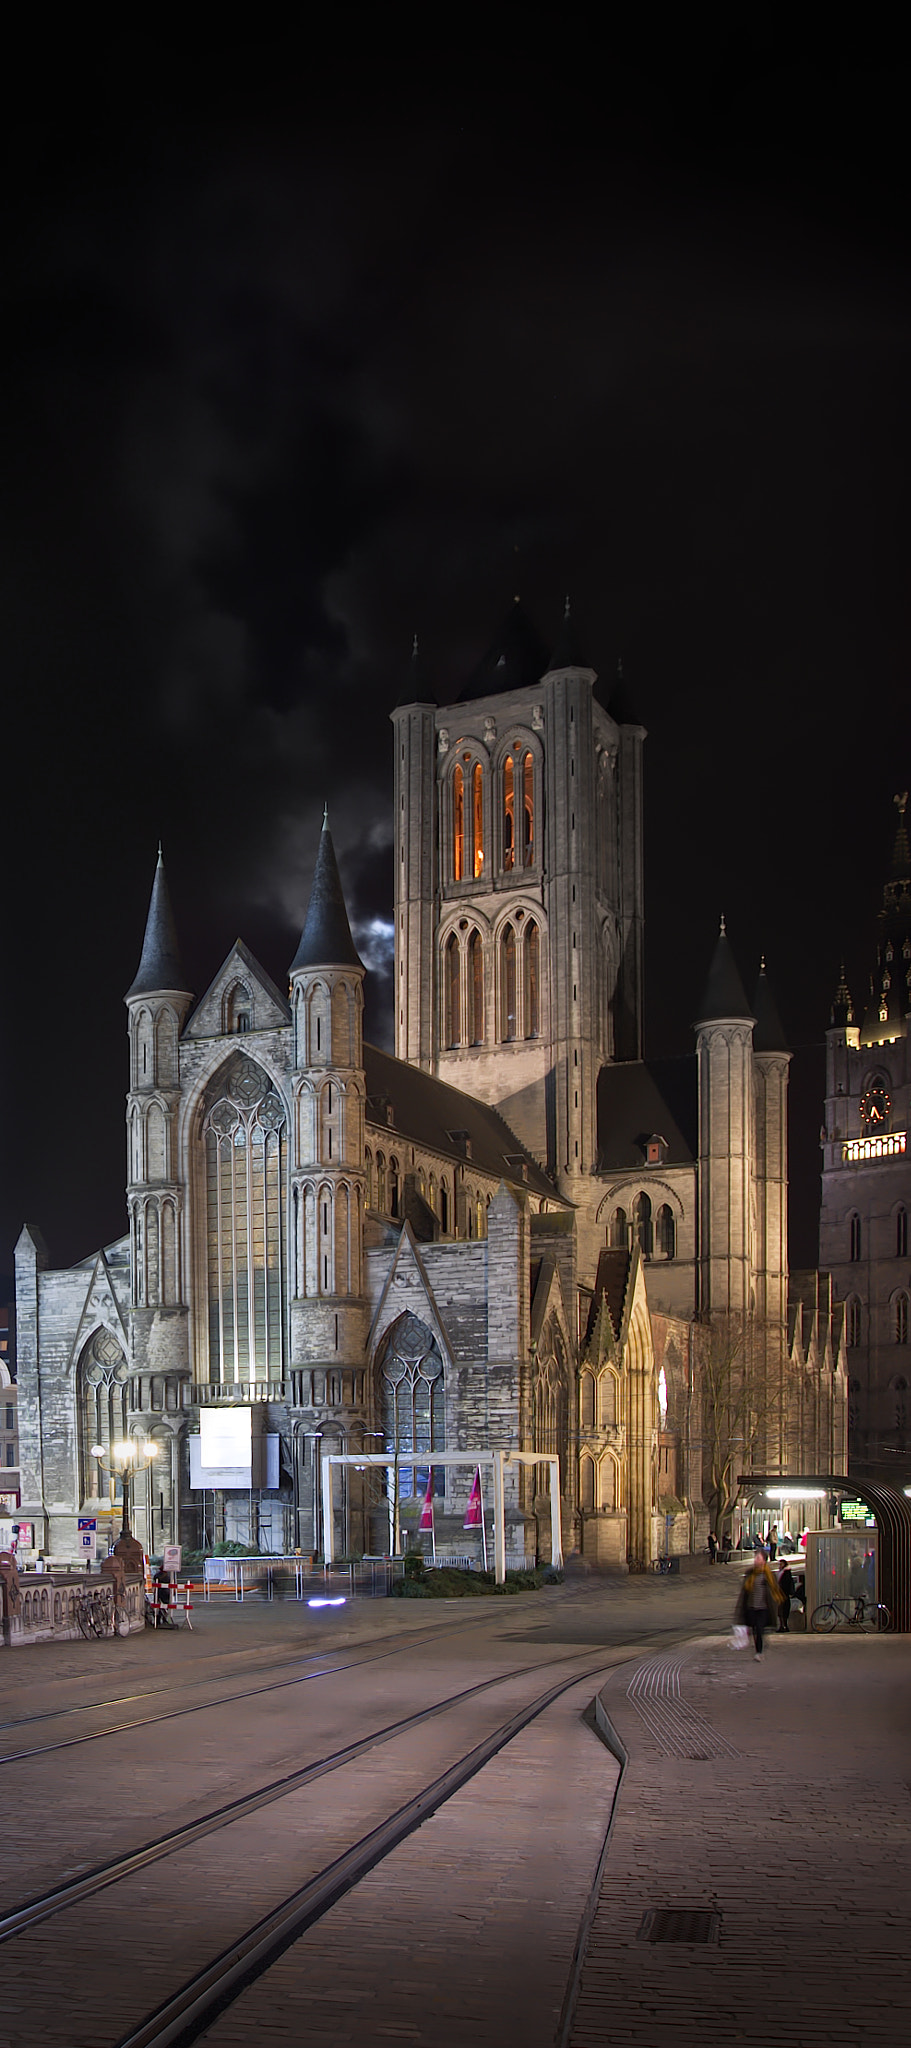 Pentax K-5 sample photo. Late night ghent photography